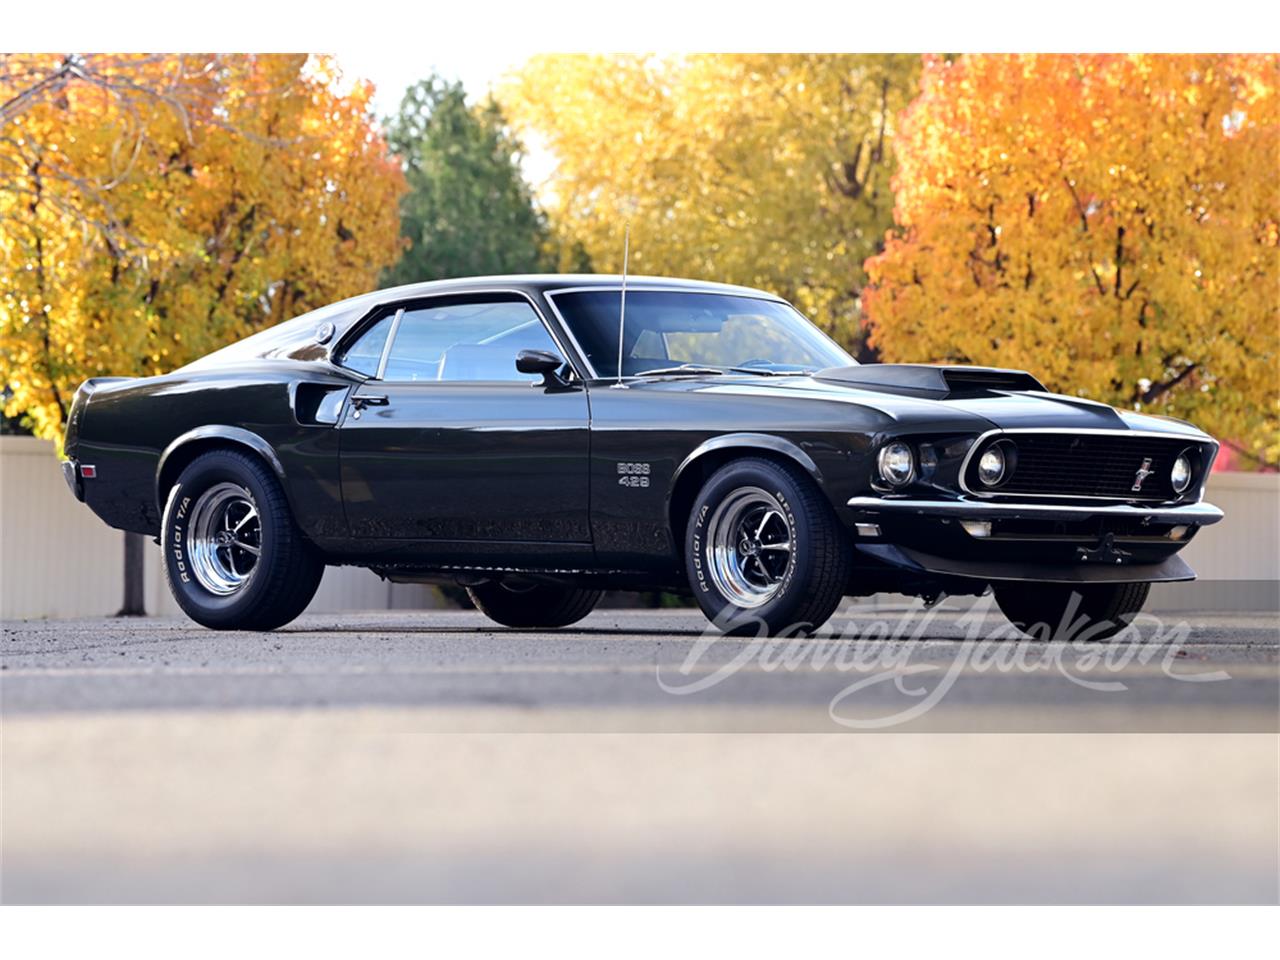 For Sale at Auction: 1969 Ford Mustang in Scottsdale, Arizona for sale in Scottsdale, AZ